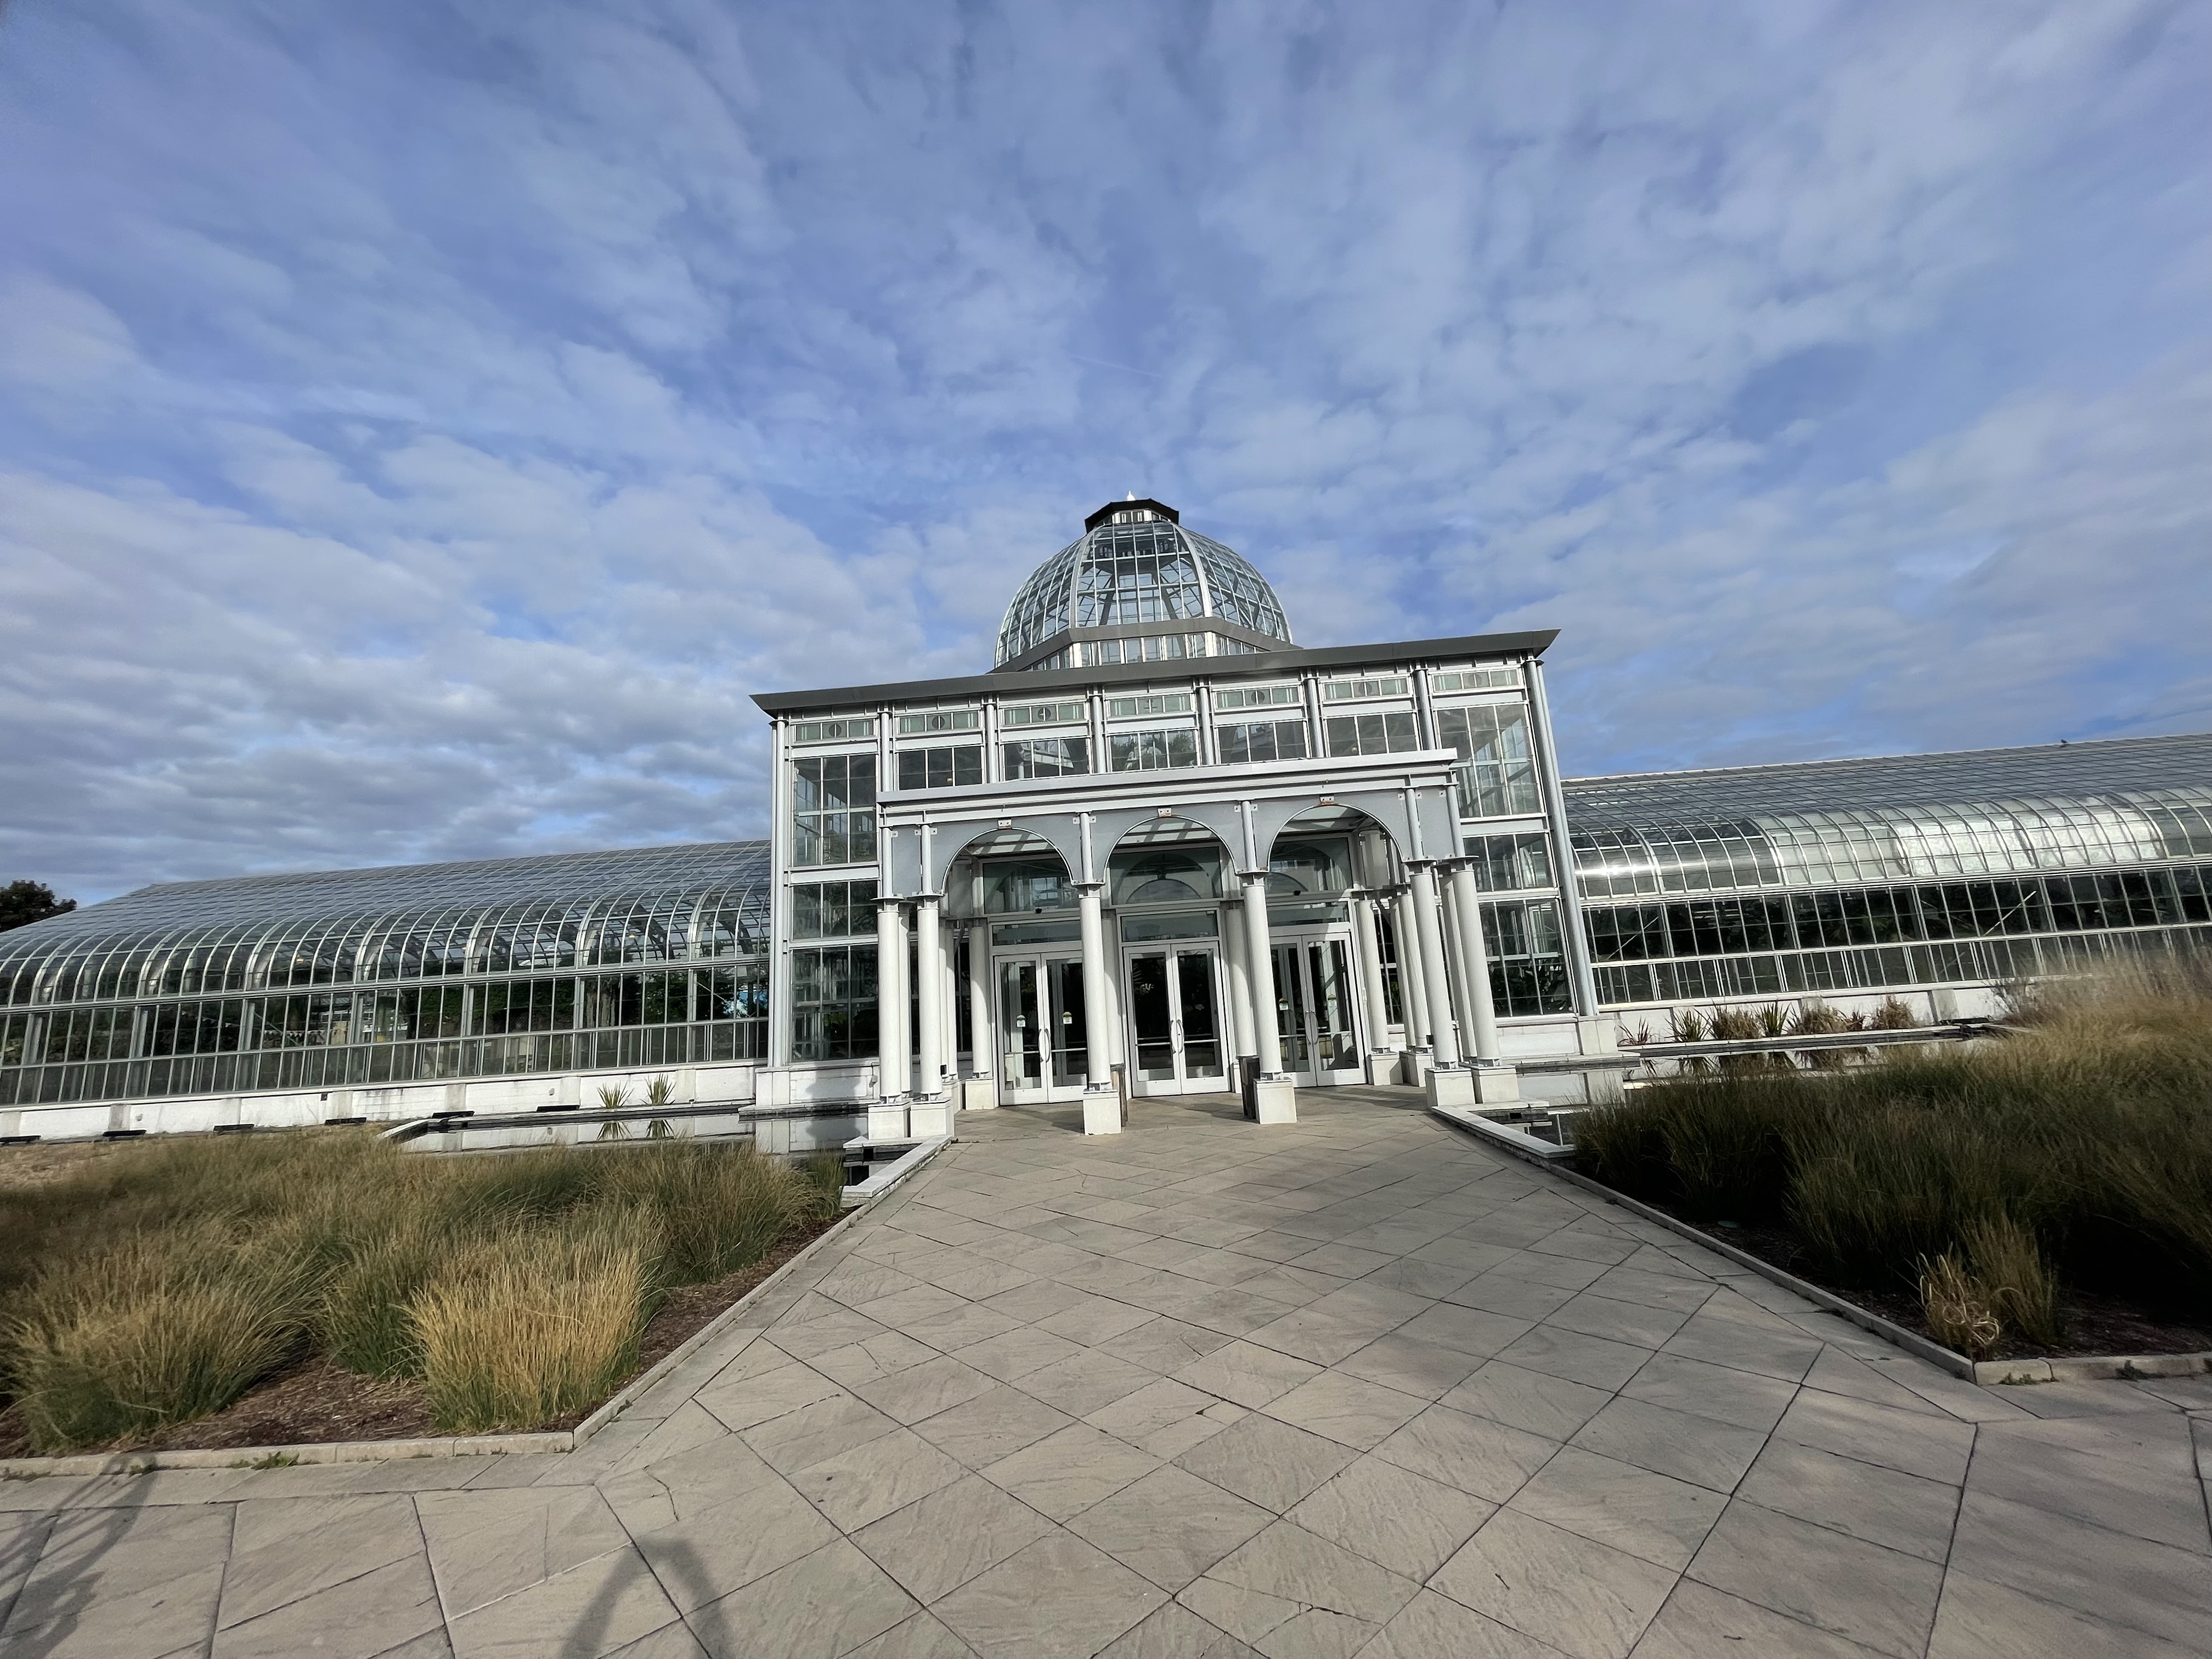 Commercial pressure wash quality project by Va Power Wash Pros at Lewis Ginter Botanical Gardens 